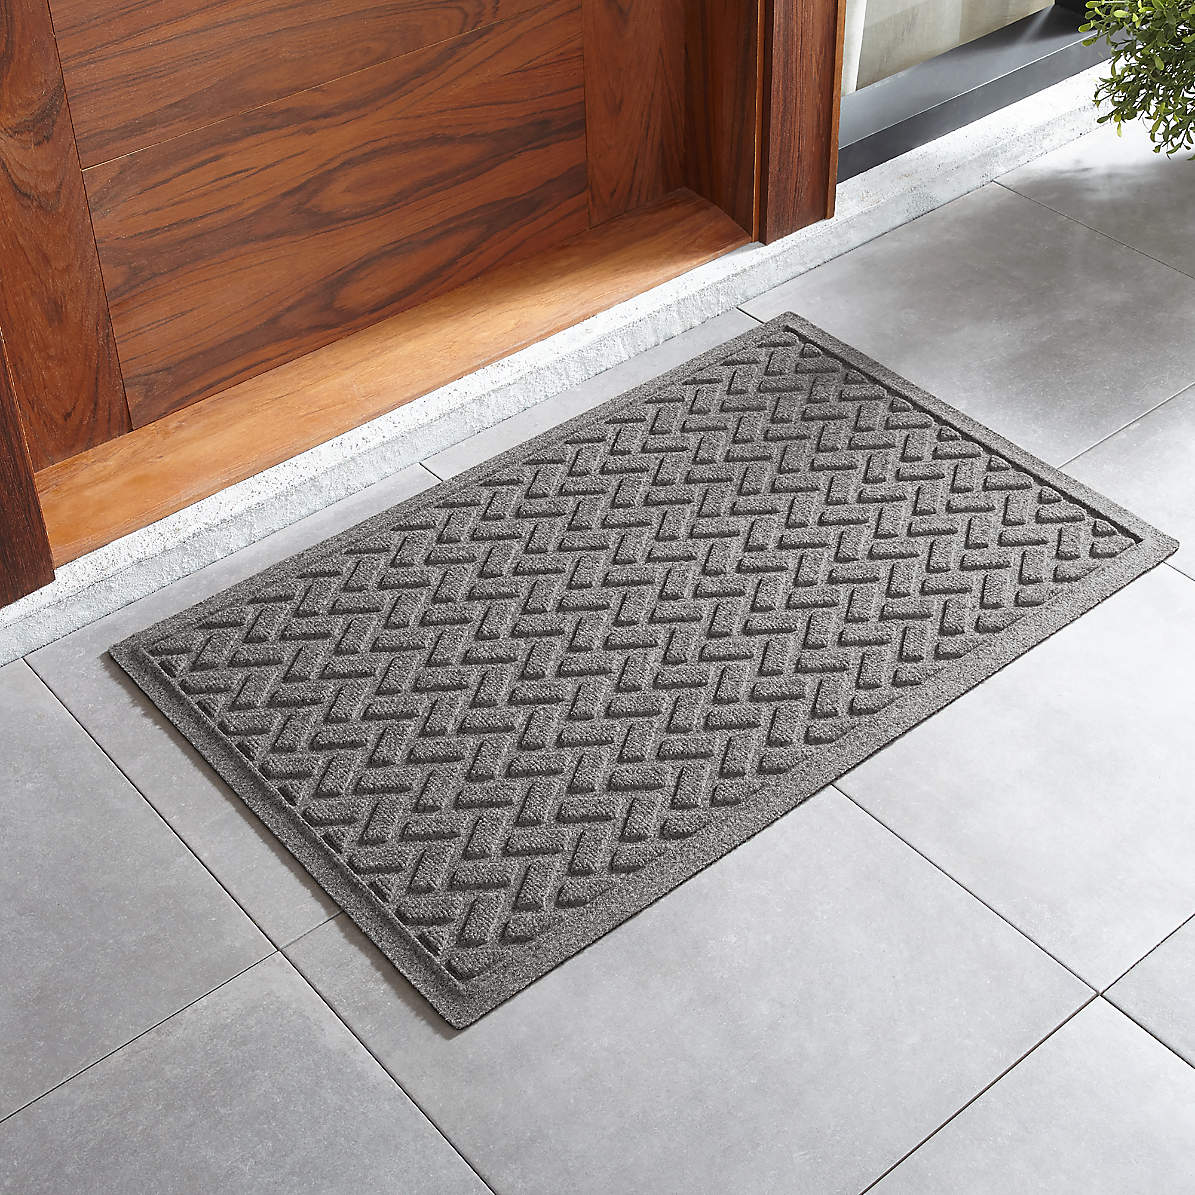 Thirsty Dashes Light Grey Doormat 22x34 + Reviews